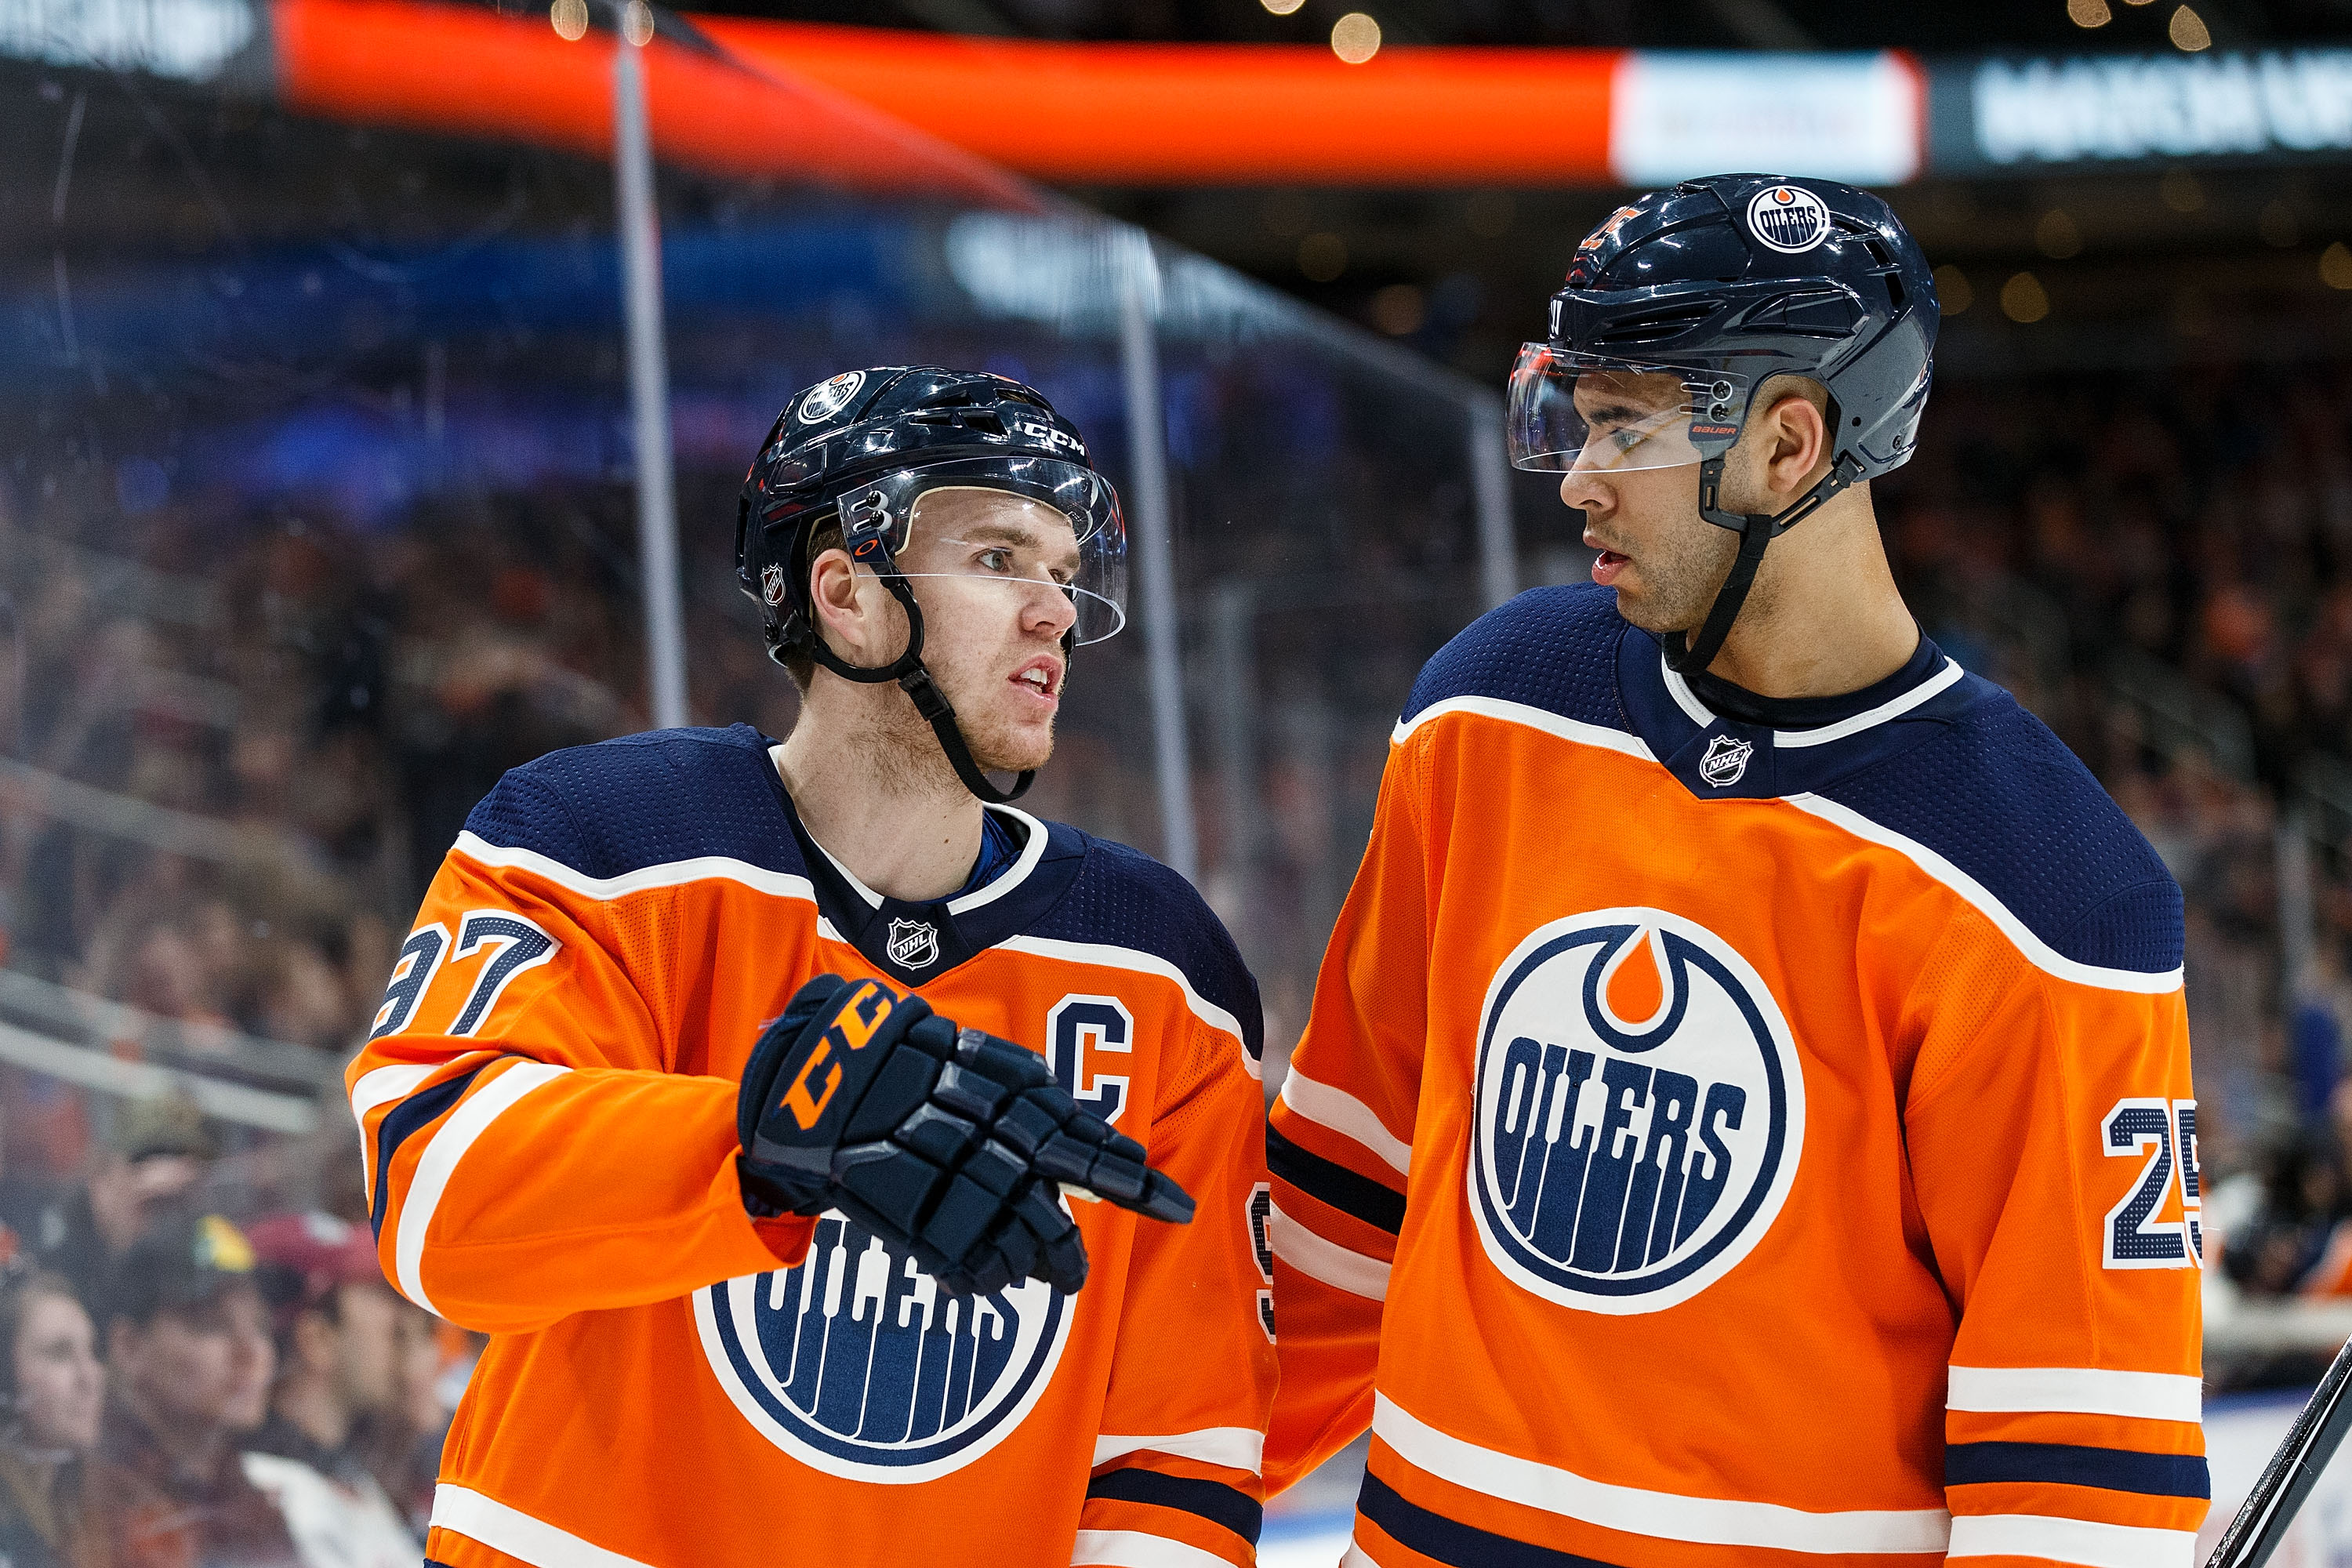 EDMONTON, AB - APRIL 05: Connor McDavid #97 and Darnell Nurse #25 of the Edmonton Oilers strategize during a break in play against the Vegas Golden Knights at Rogers Place on April 5, 2018 in Edmonton, Canada.